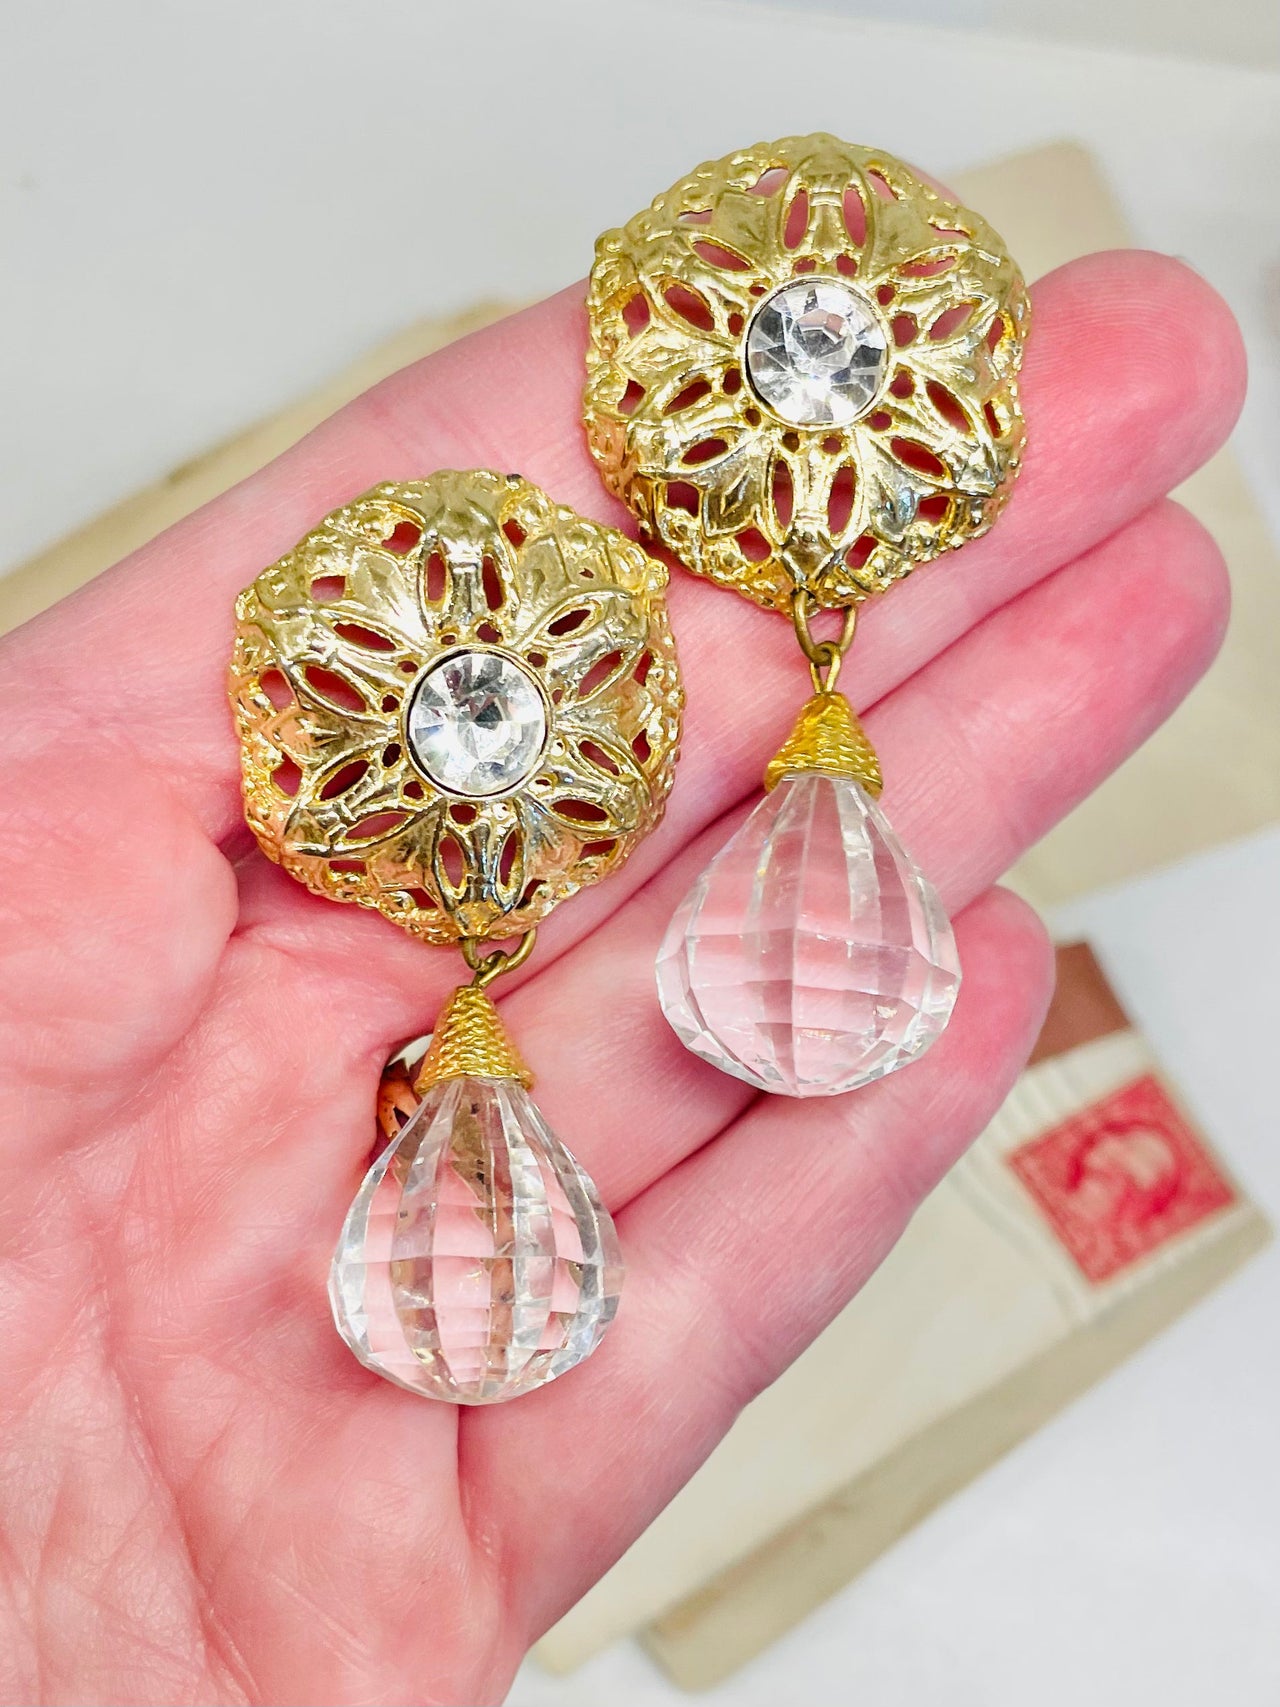 1980s Gold Filigree Pierced Earrings with Lucite Drops Jewelry Bloomers and Frocks 